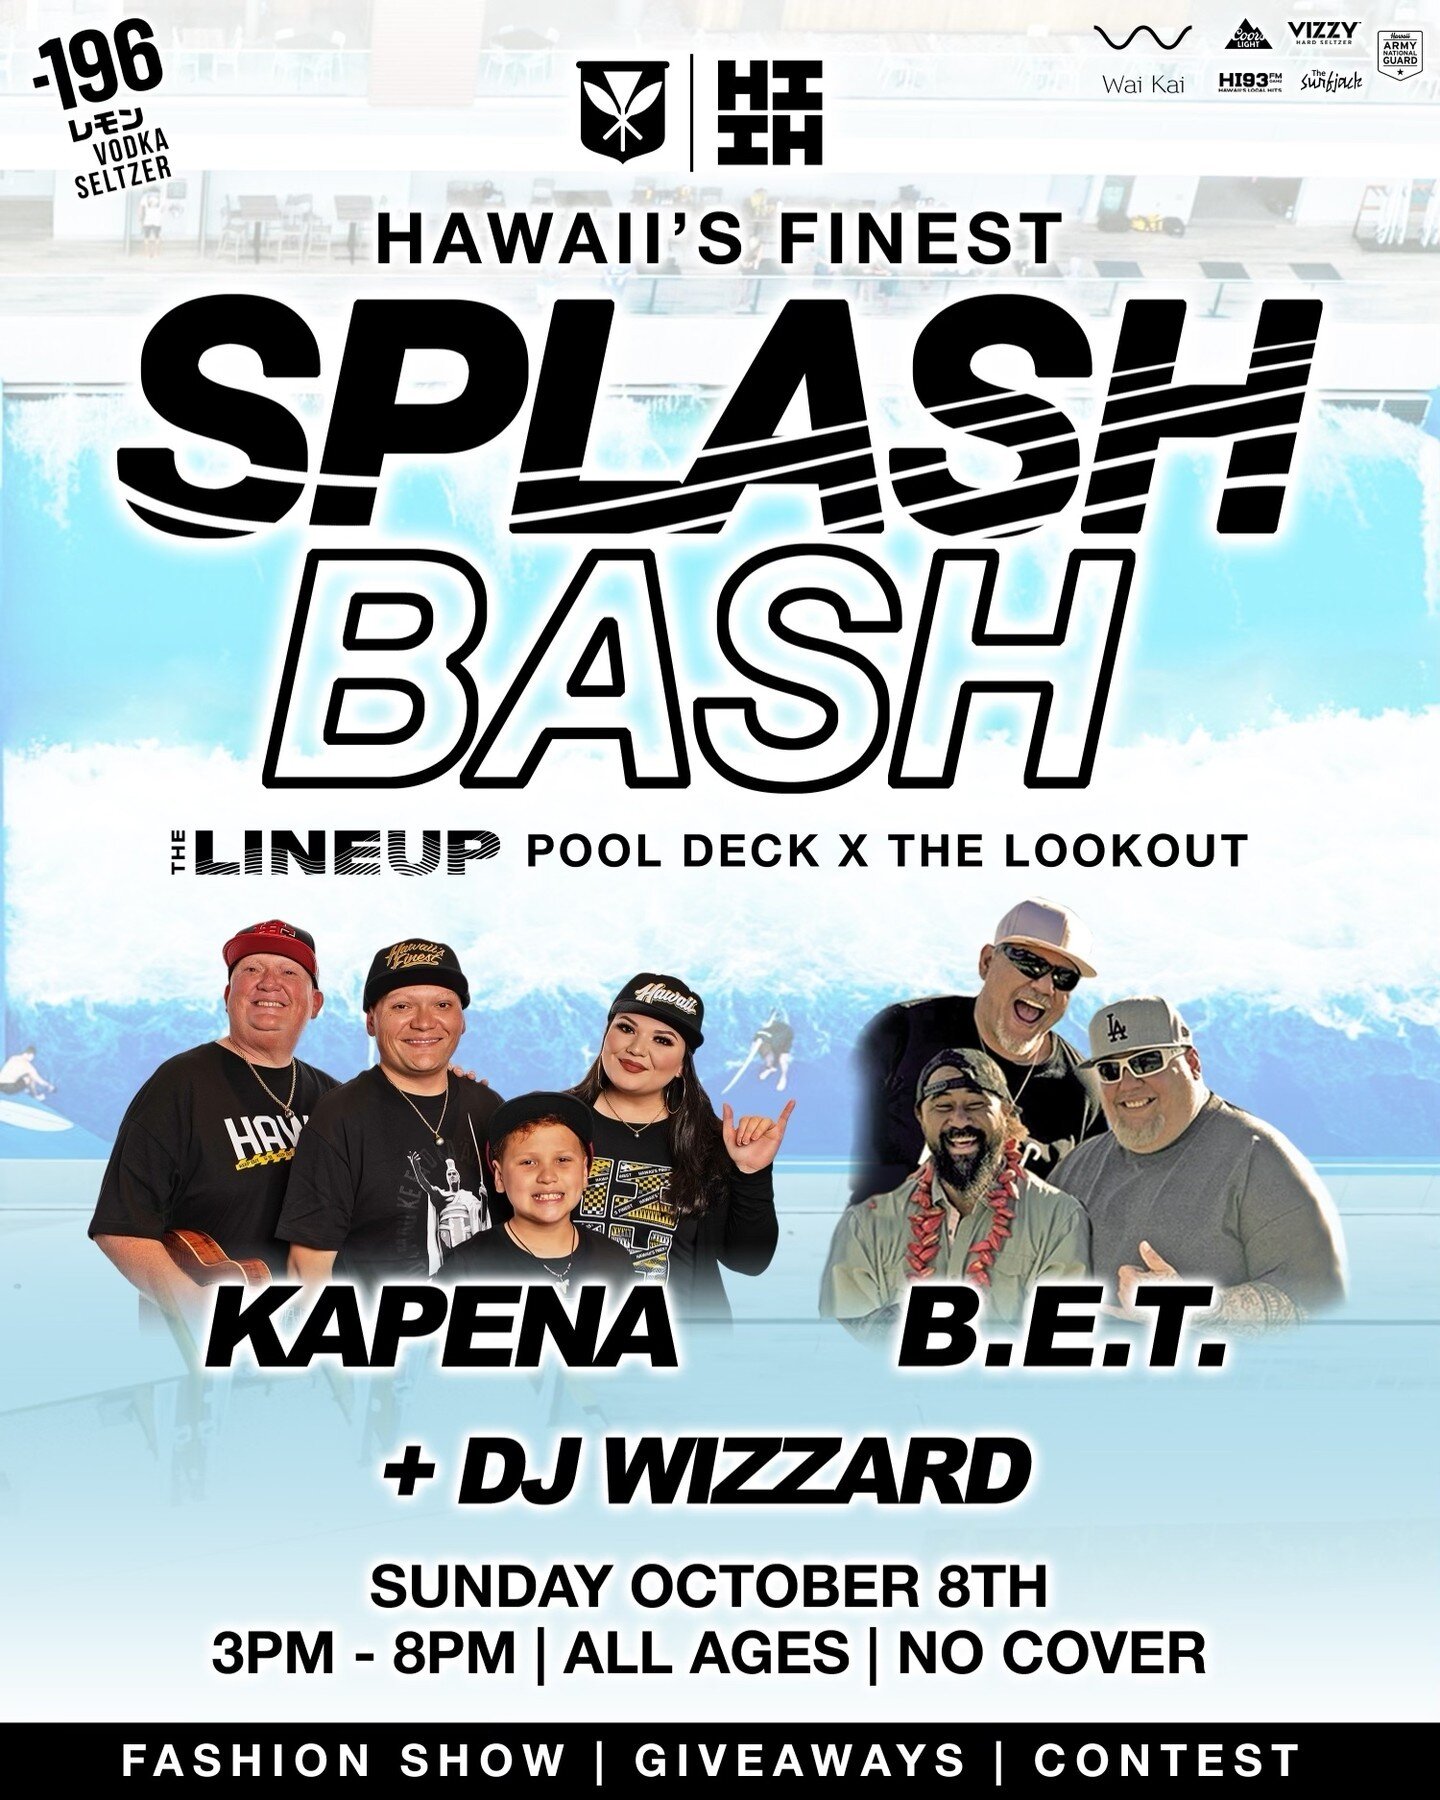 Splash Bash going down at Wai Kai on October 8th. Make sure to save the date, you don't wanna miss...#HIFinest